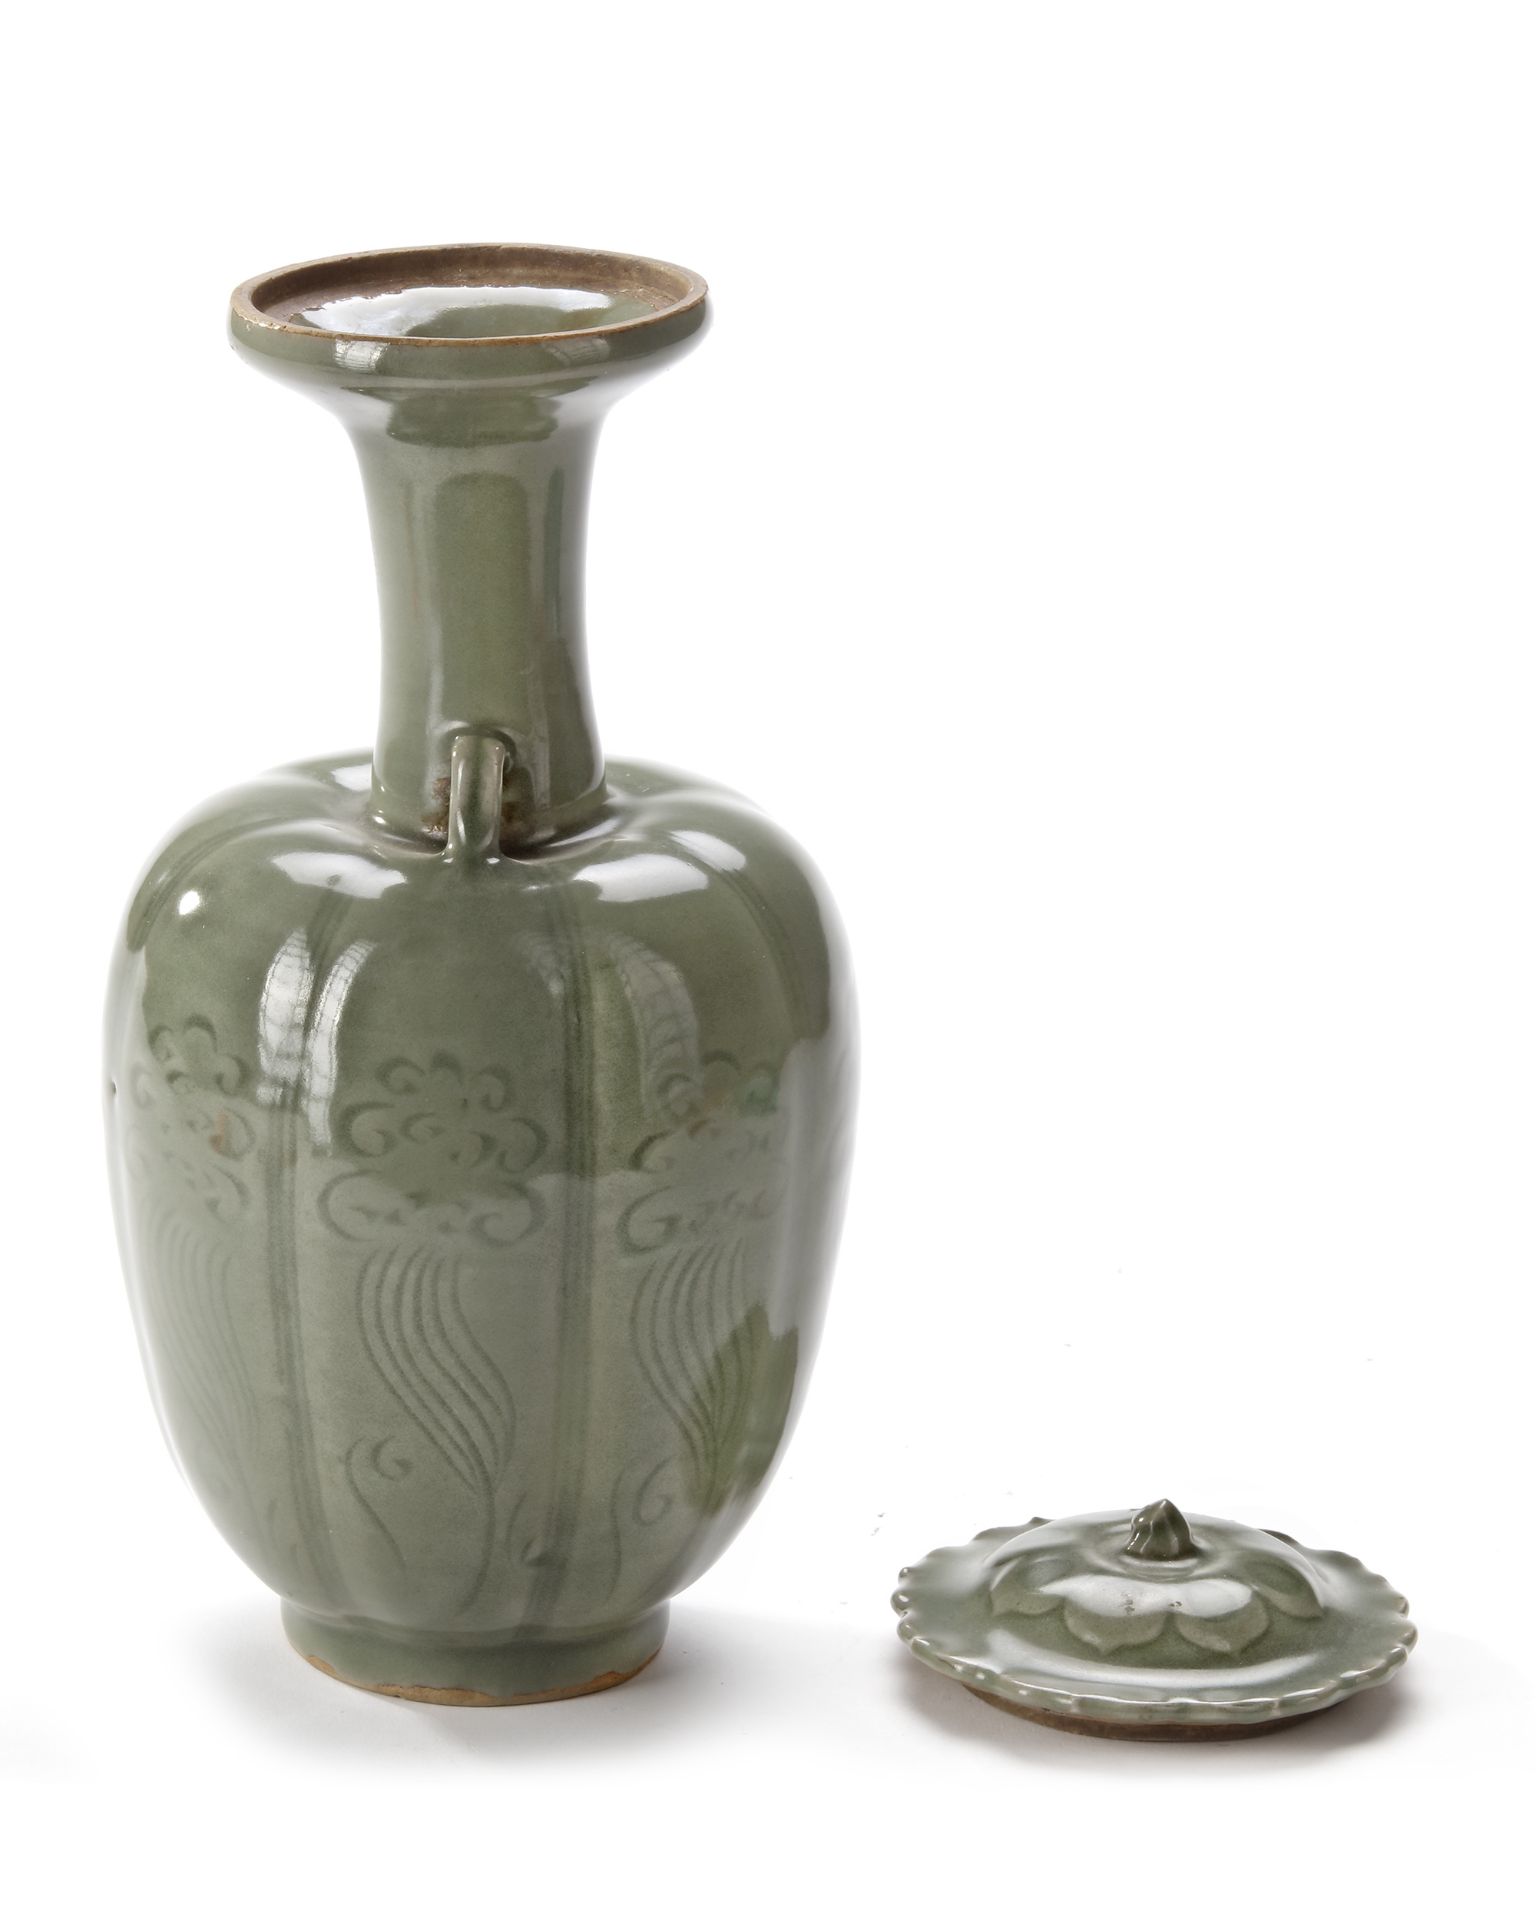 A CHINESE LONGQUAN CELADON GLAZED MELON-SHAPED VASE, SONG DYNASTY (960-1279) - Image 3 of 4